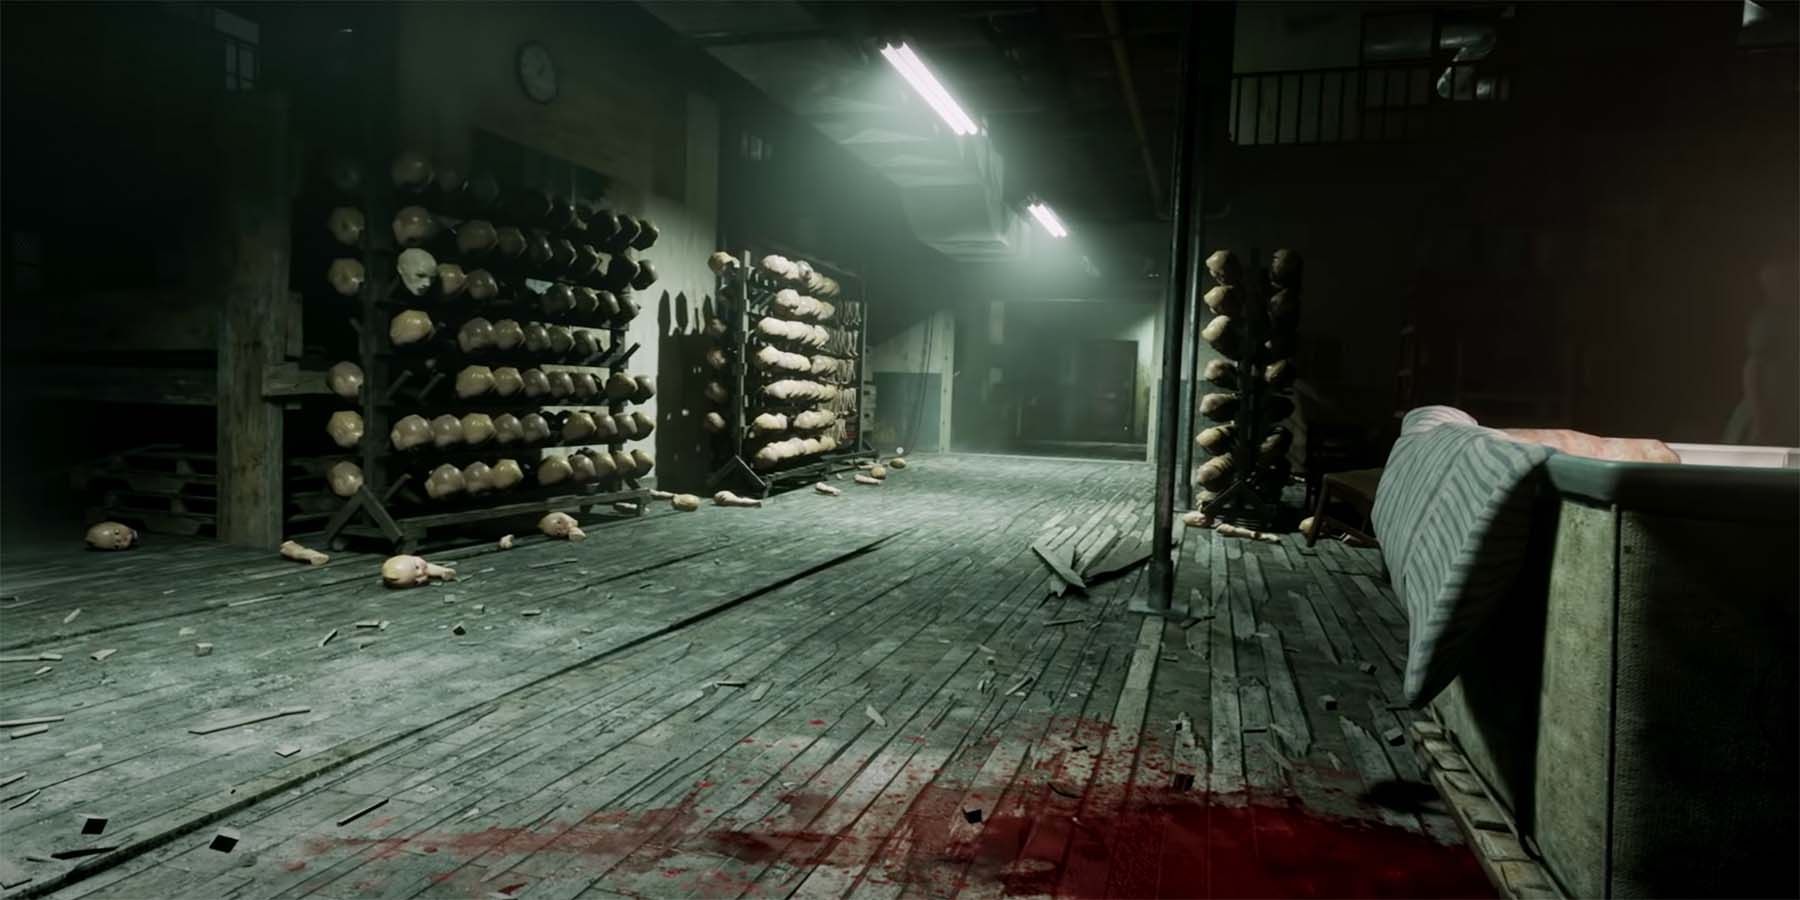 The Outlast Trials: Release Date, Trailer, Gameplay, and News